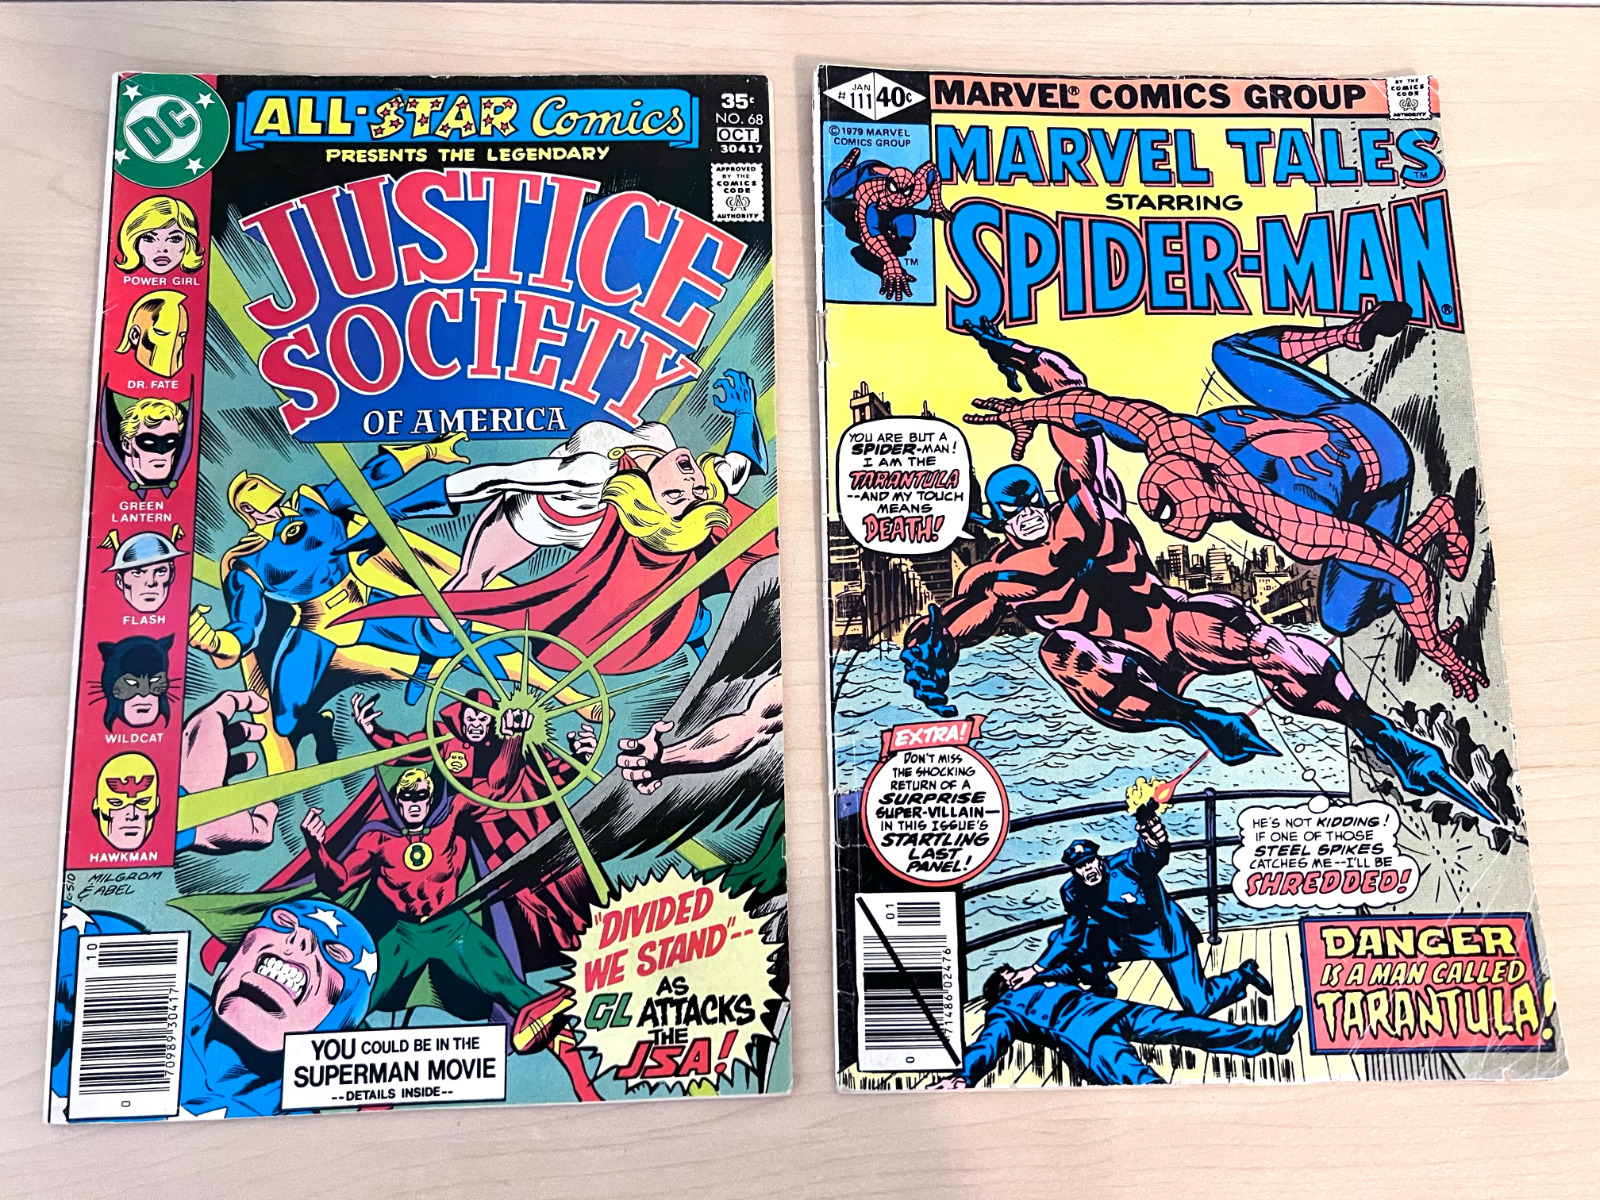 Vintage MARVEL & DC Comic Books Lot of 2 Justice Society of America & Spiderman